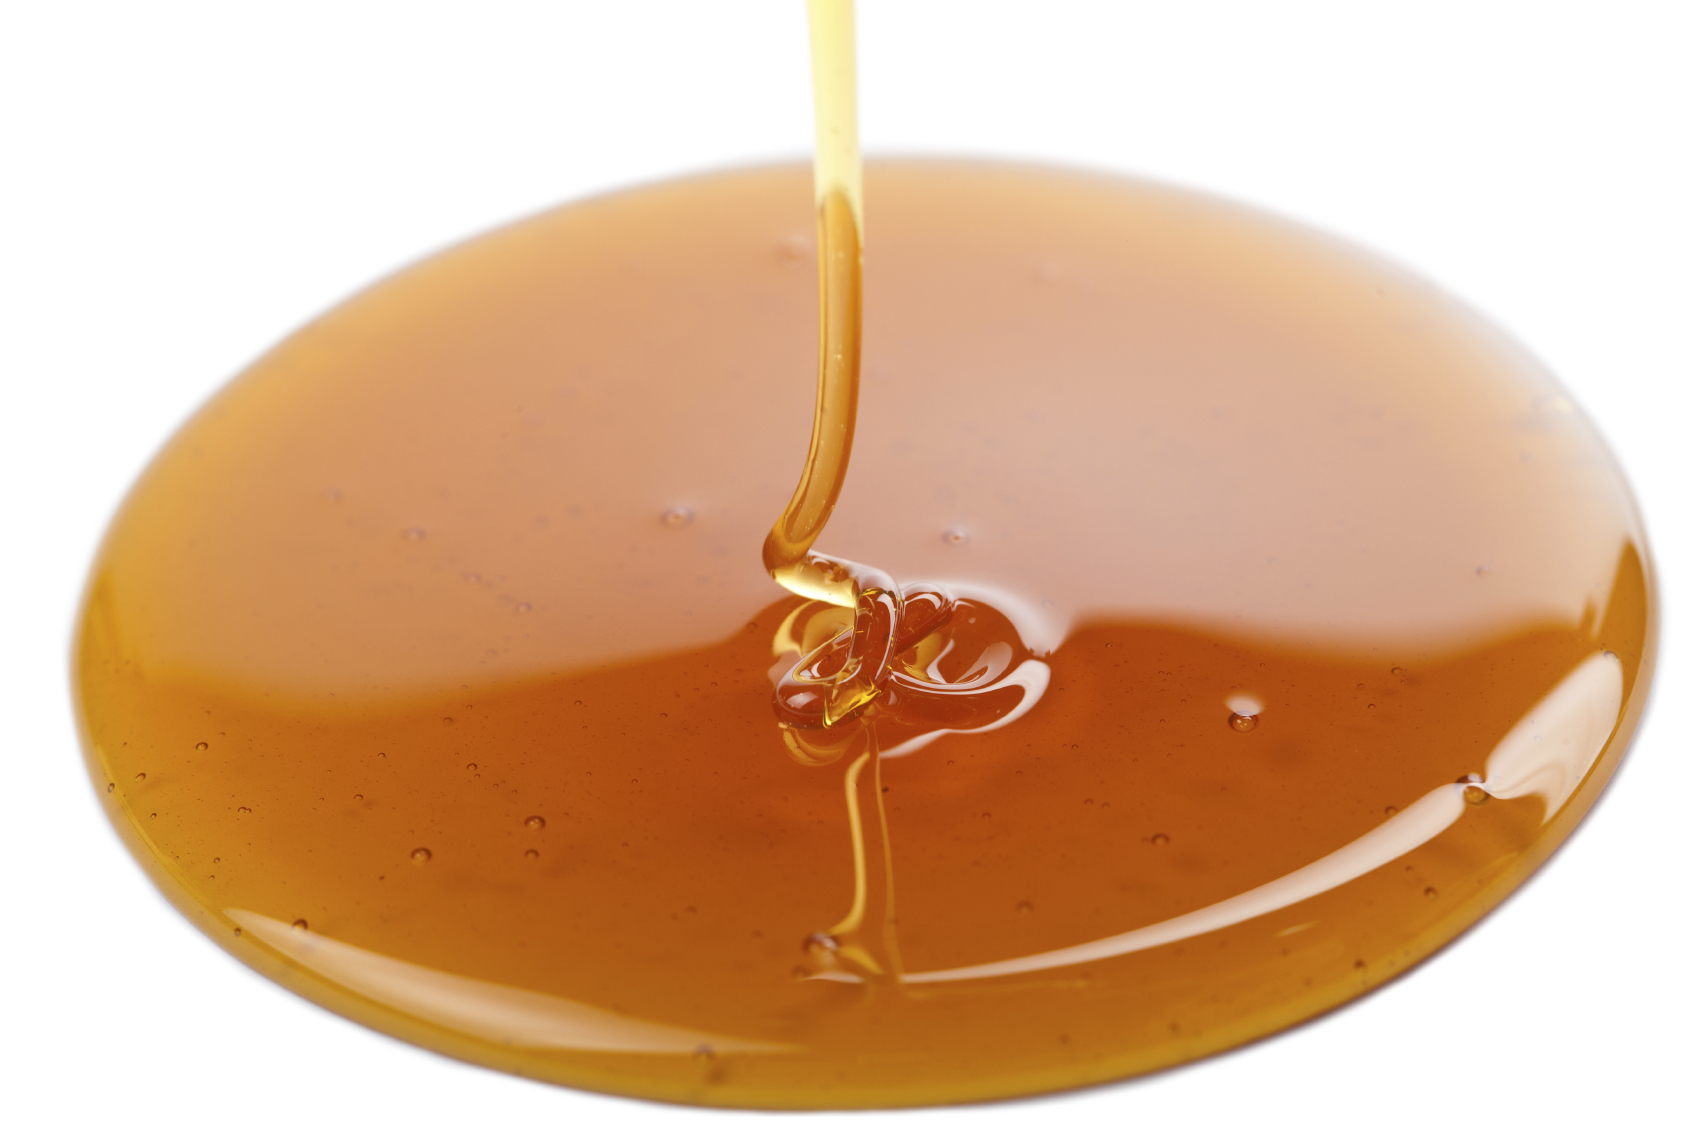 High fructose corn syrup may make you pack on pounds. It may even raise your risk for disease. But new research confirms its most lethal side effect yet…